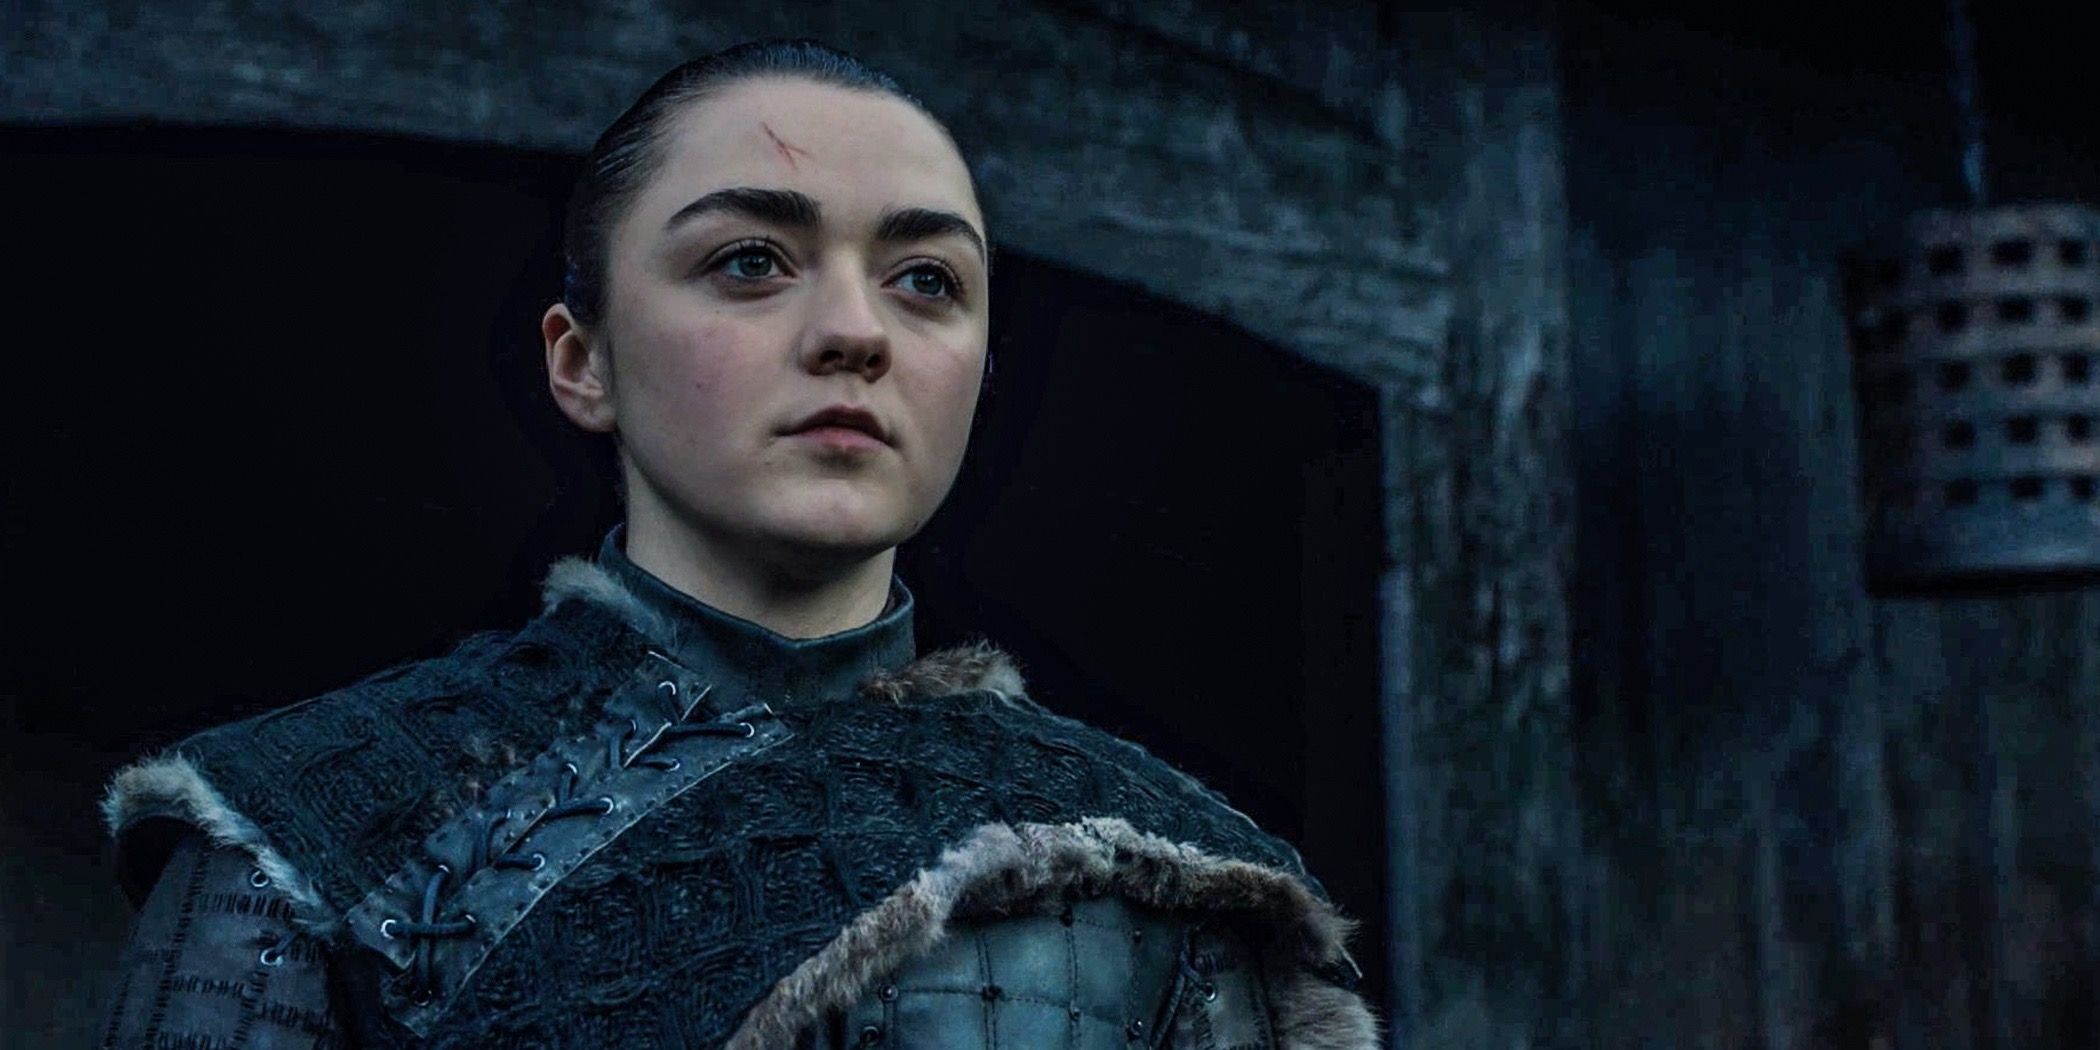 Game of Thrones Which Stark Are You Based On Your Zodiac Sign